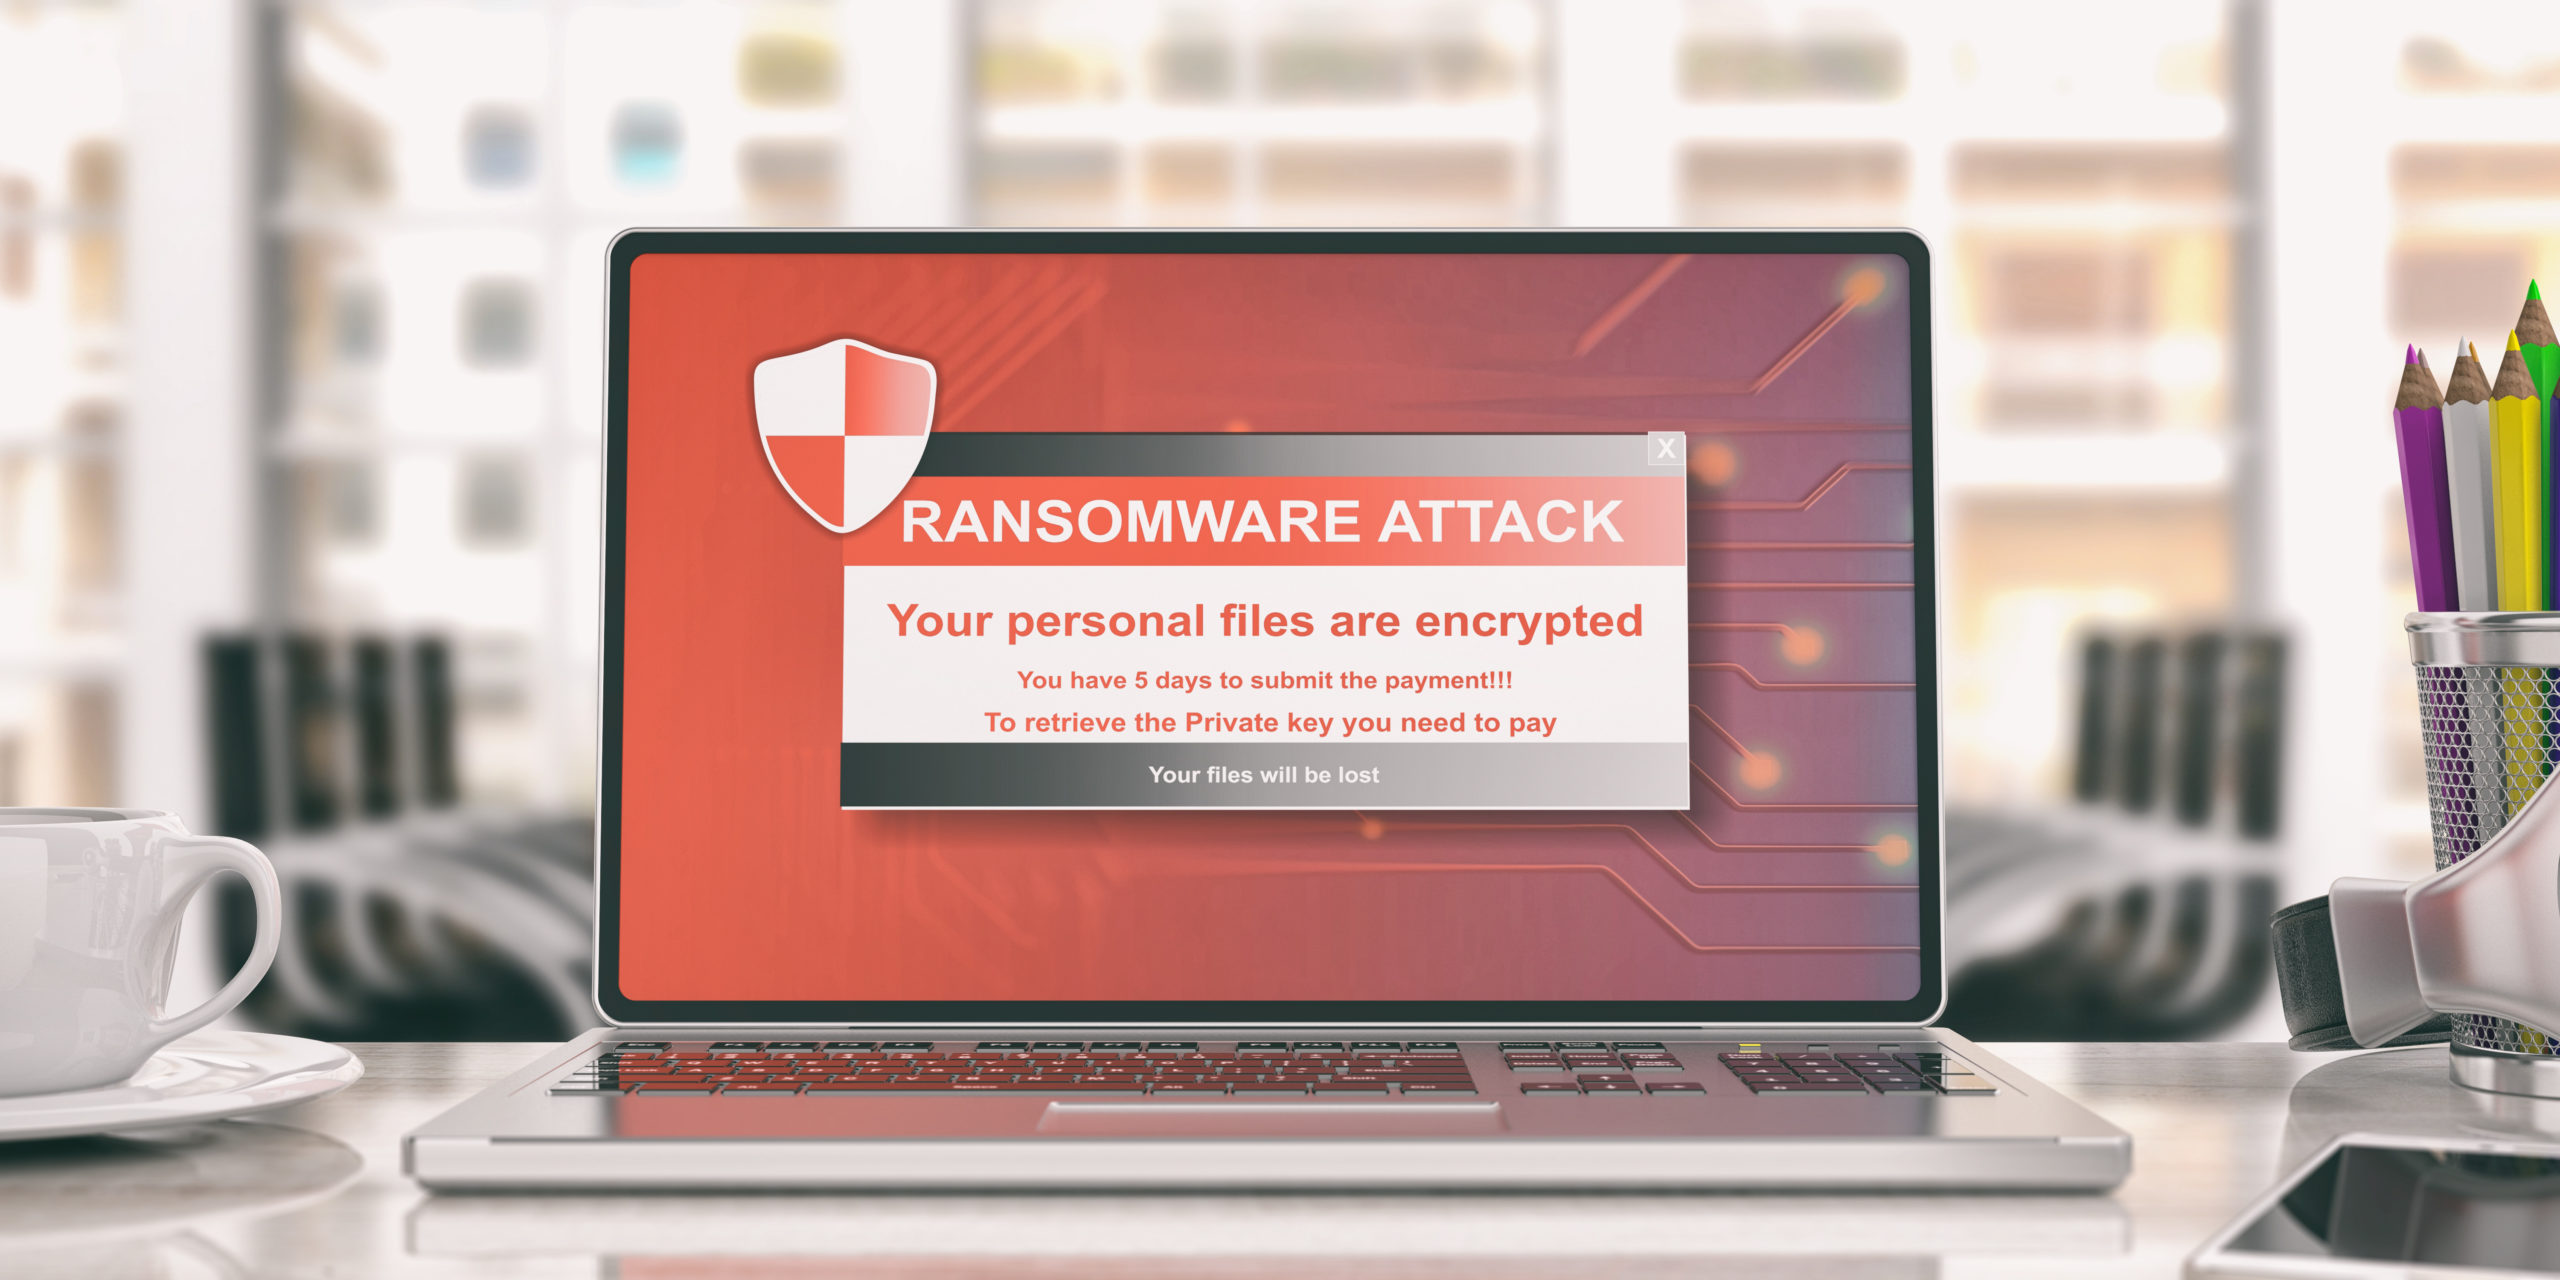  Computer laptop sits on office desk, its screen with warning reading, “RANSOMWARE ATTACK. Your personal files are encrypted.”